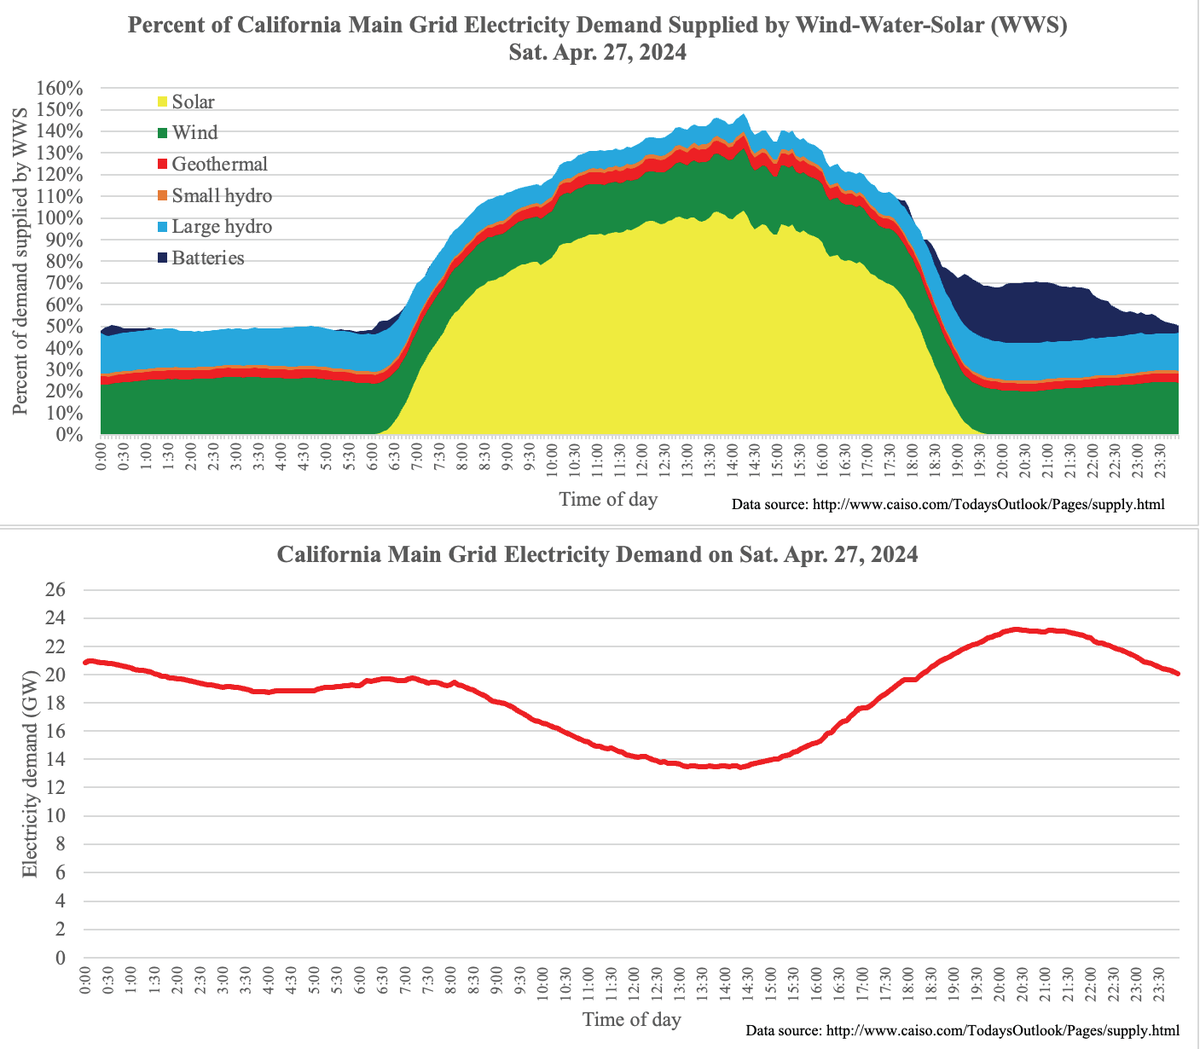 What is even more amazing about Saturday, Apr. 27?

In the 24-hour average, #WIndWaterSolar supplied 83.5% of California's electricity demand 

This is the largest 24-hour average WWS to date.